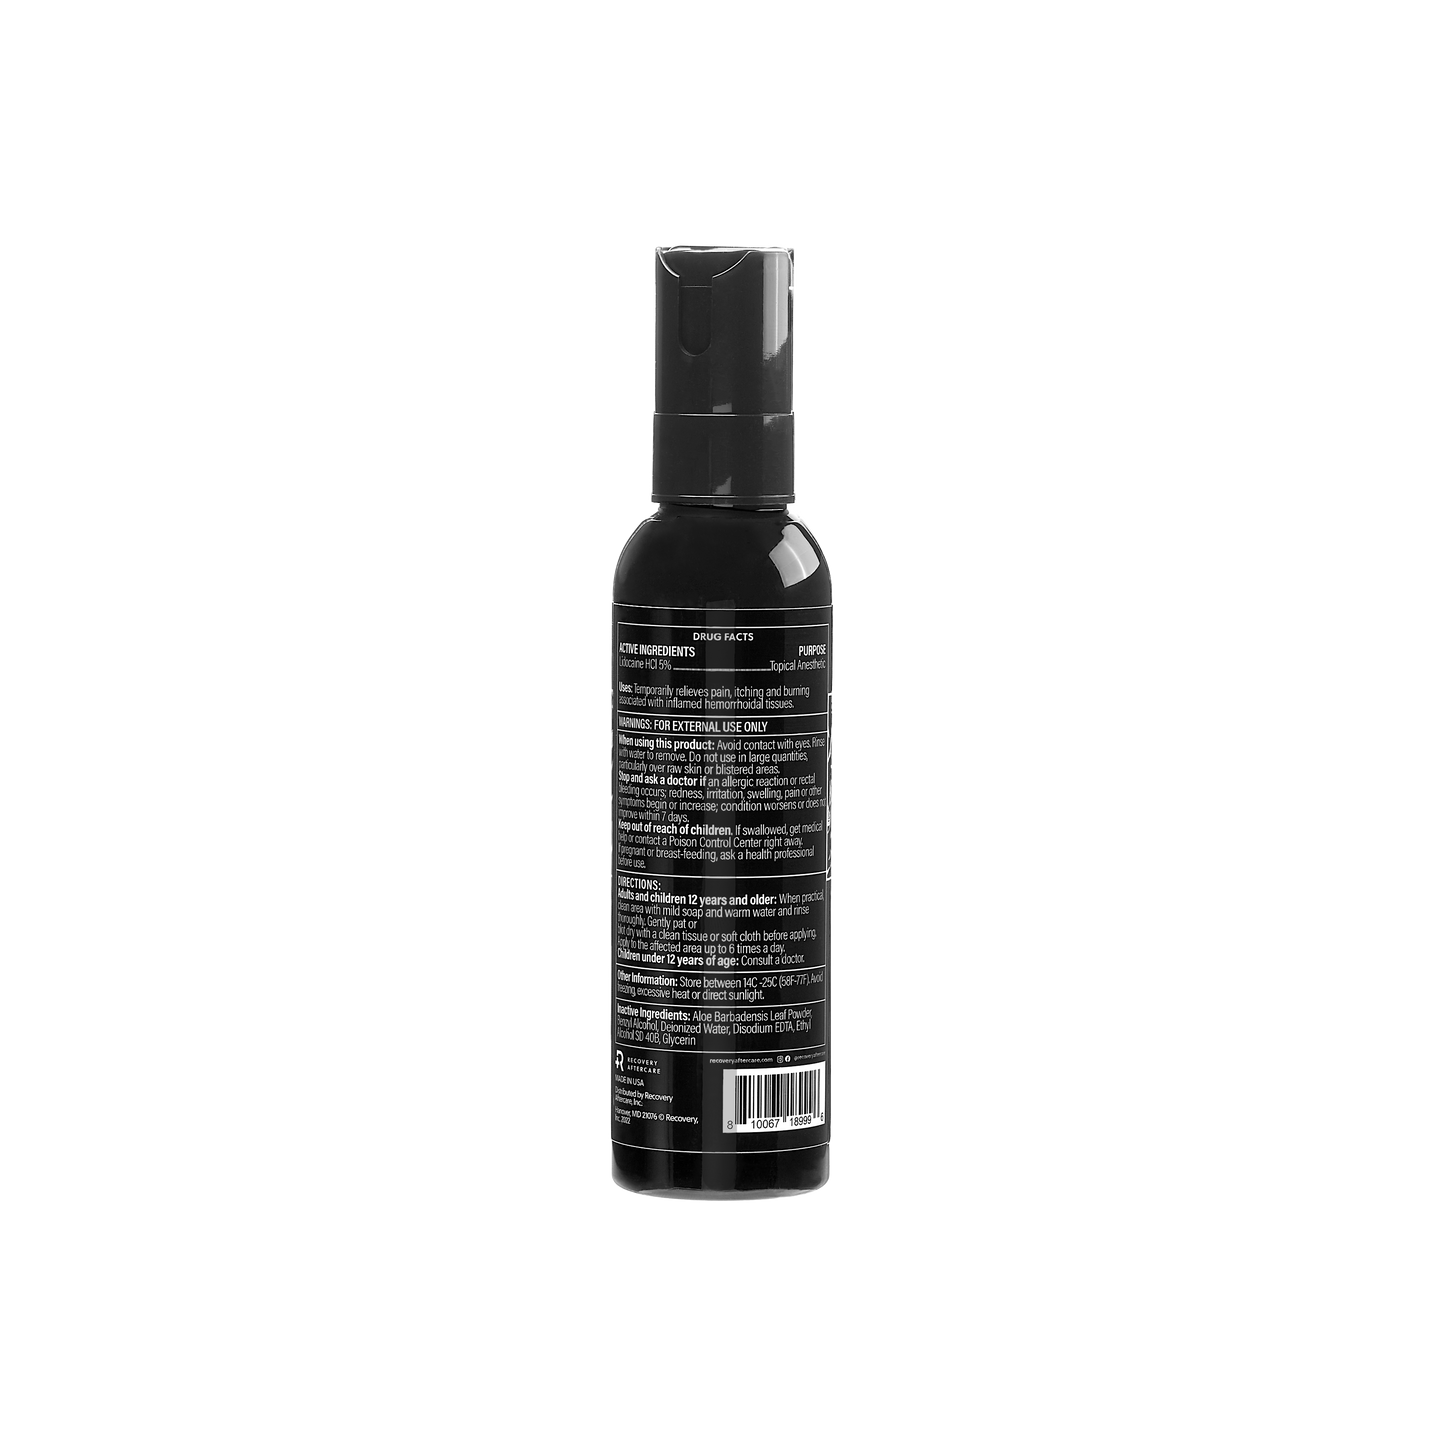 Recovery Numbing Spray — 4oz Bottle